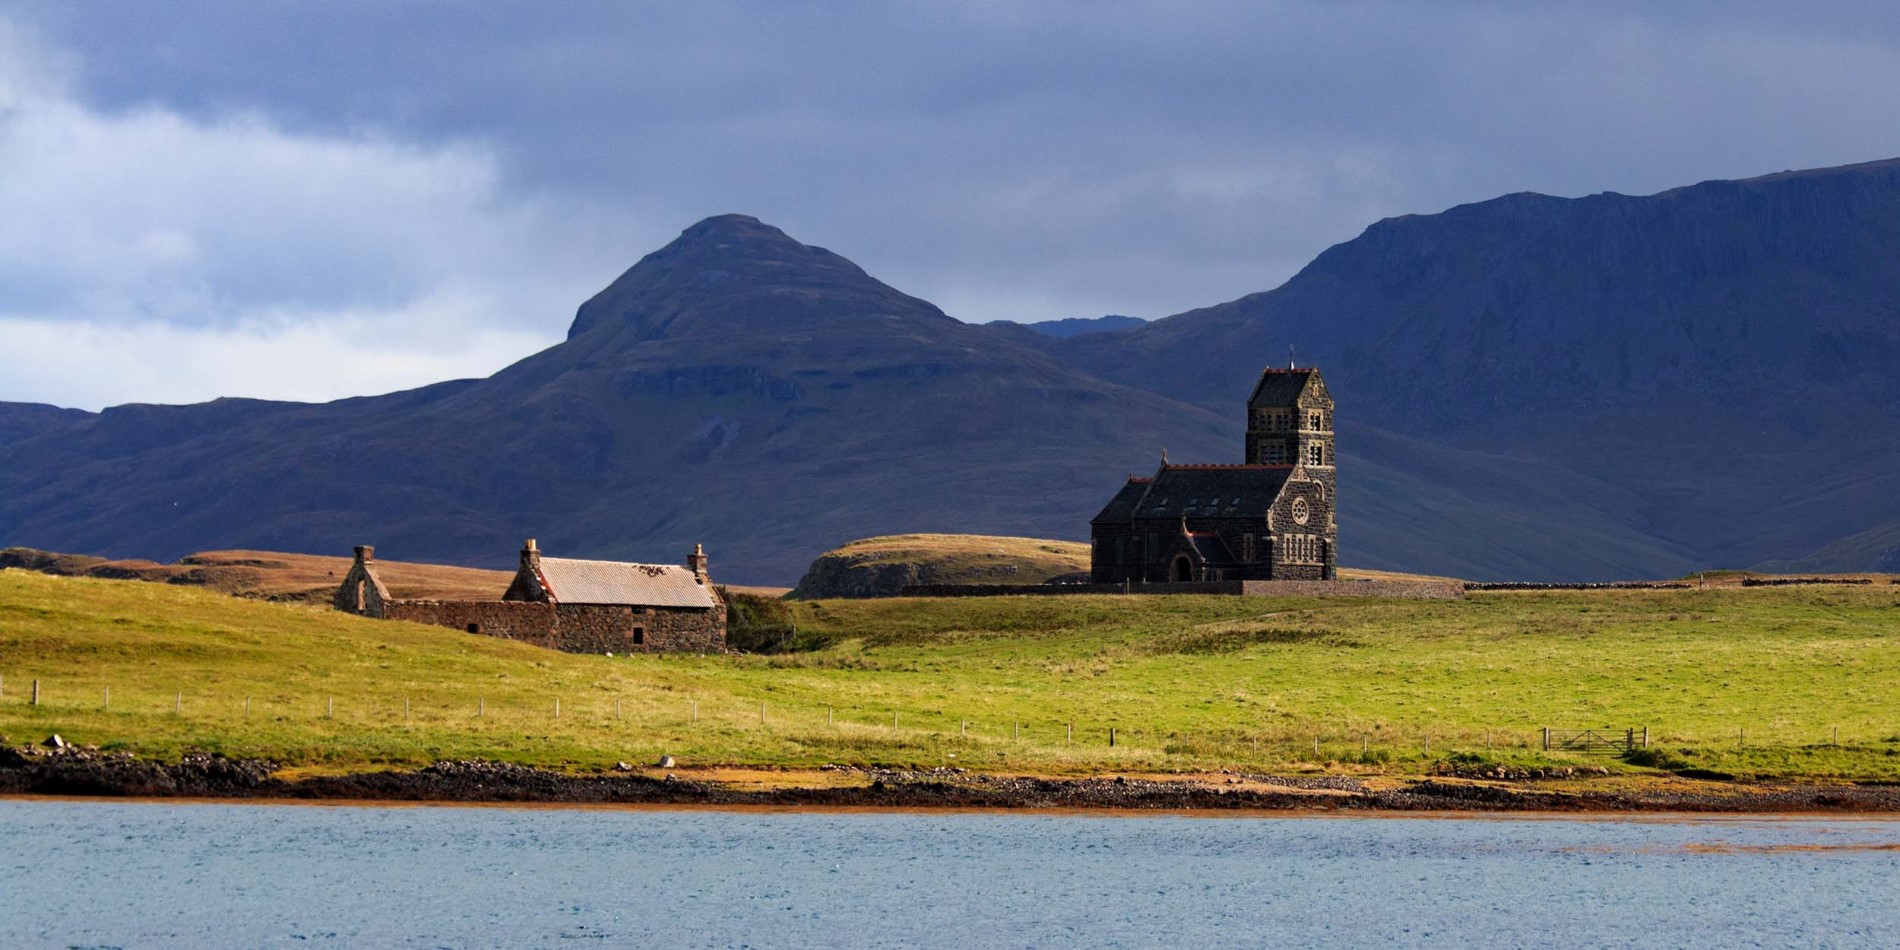 The Isle of Canna is known as the Garden of the Hebrides.